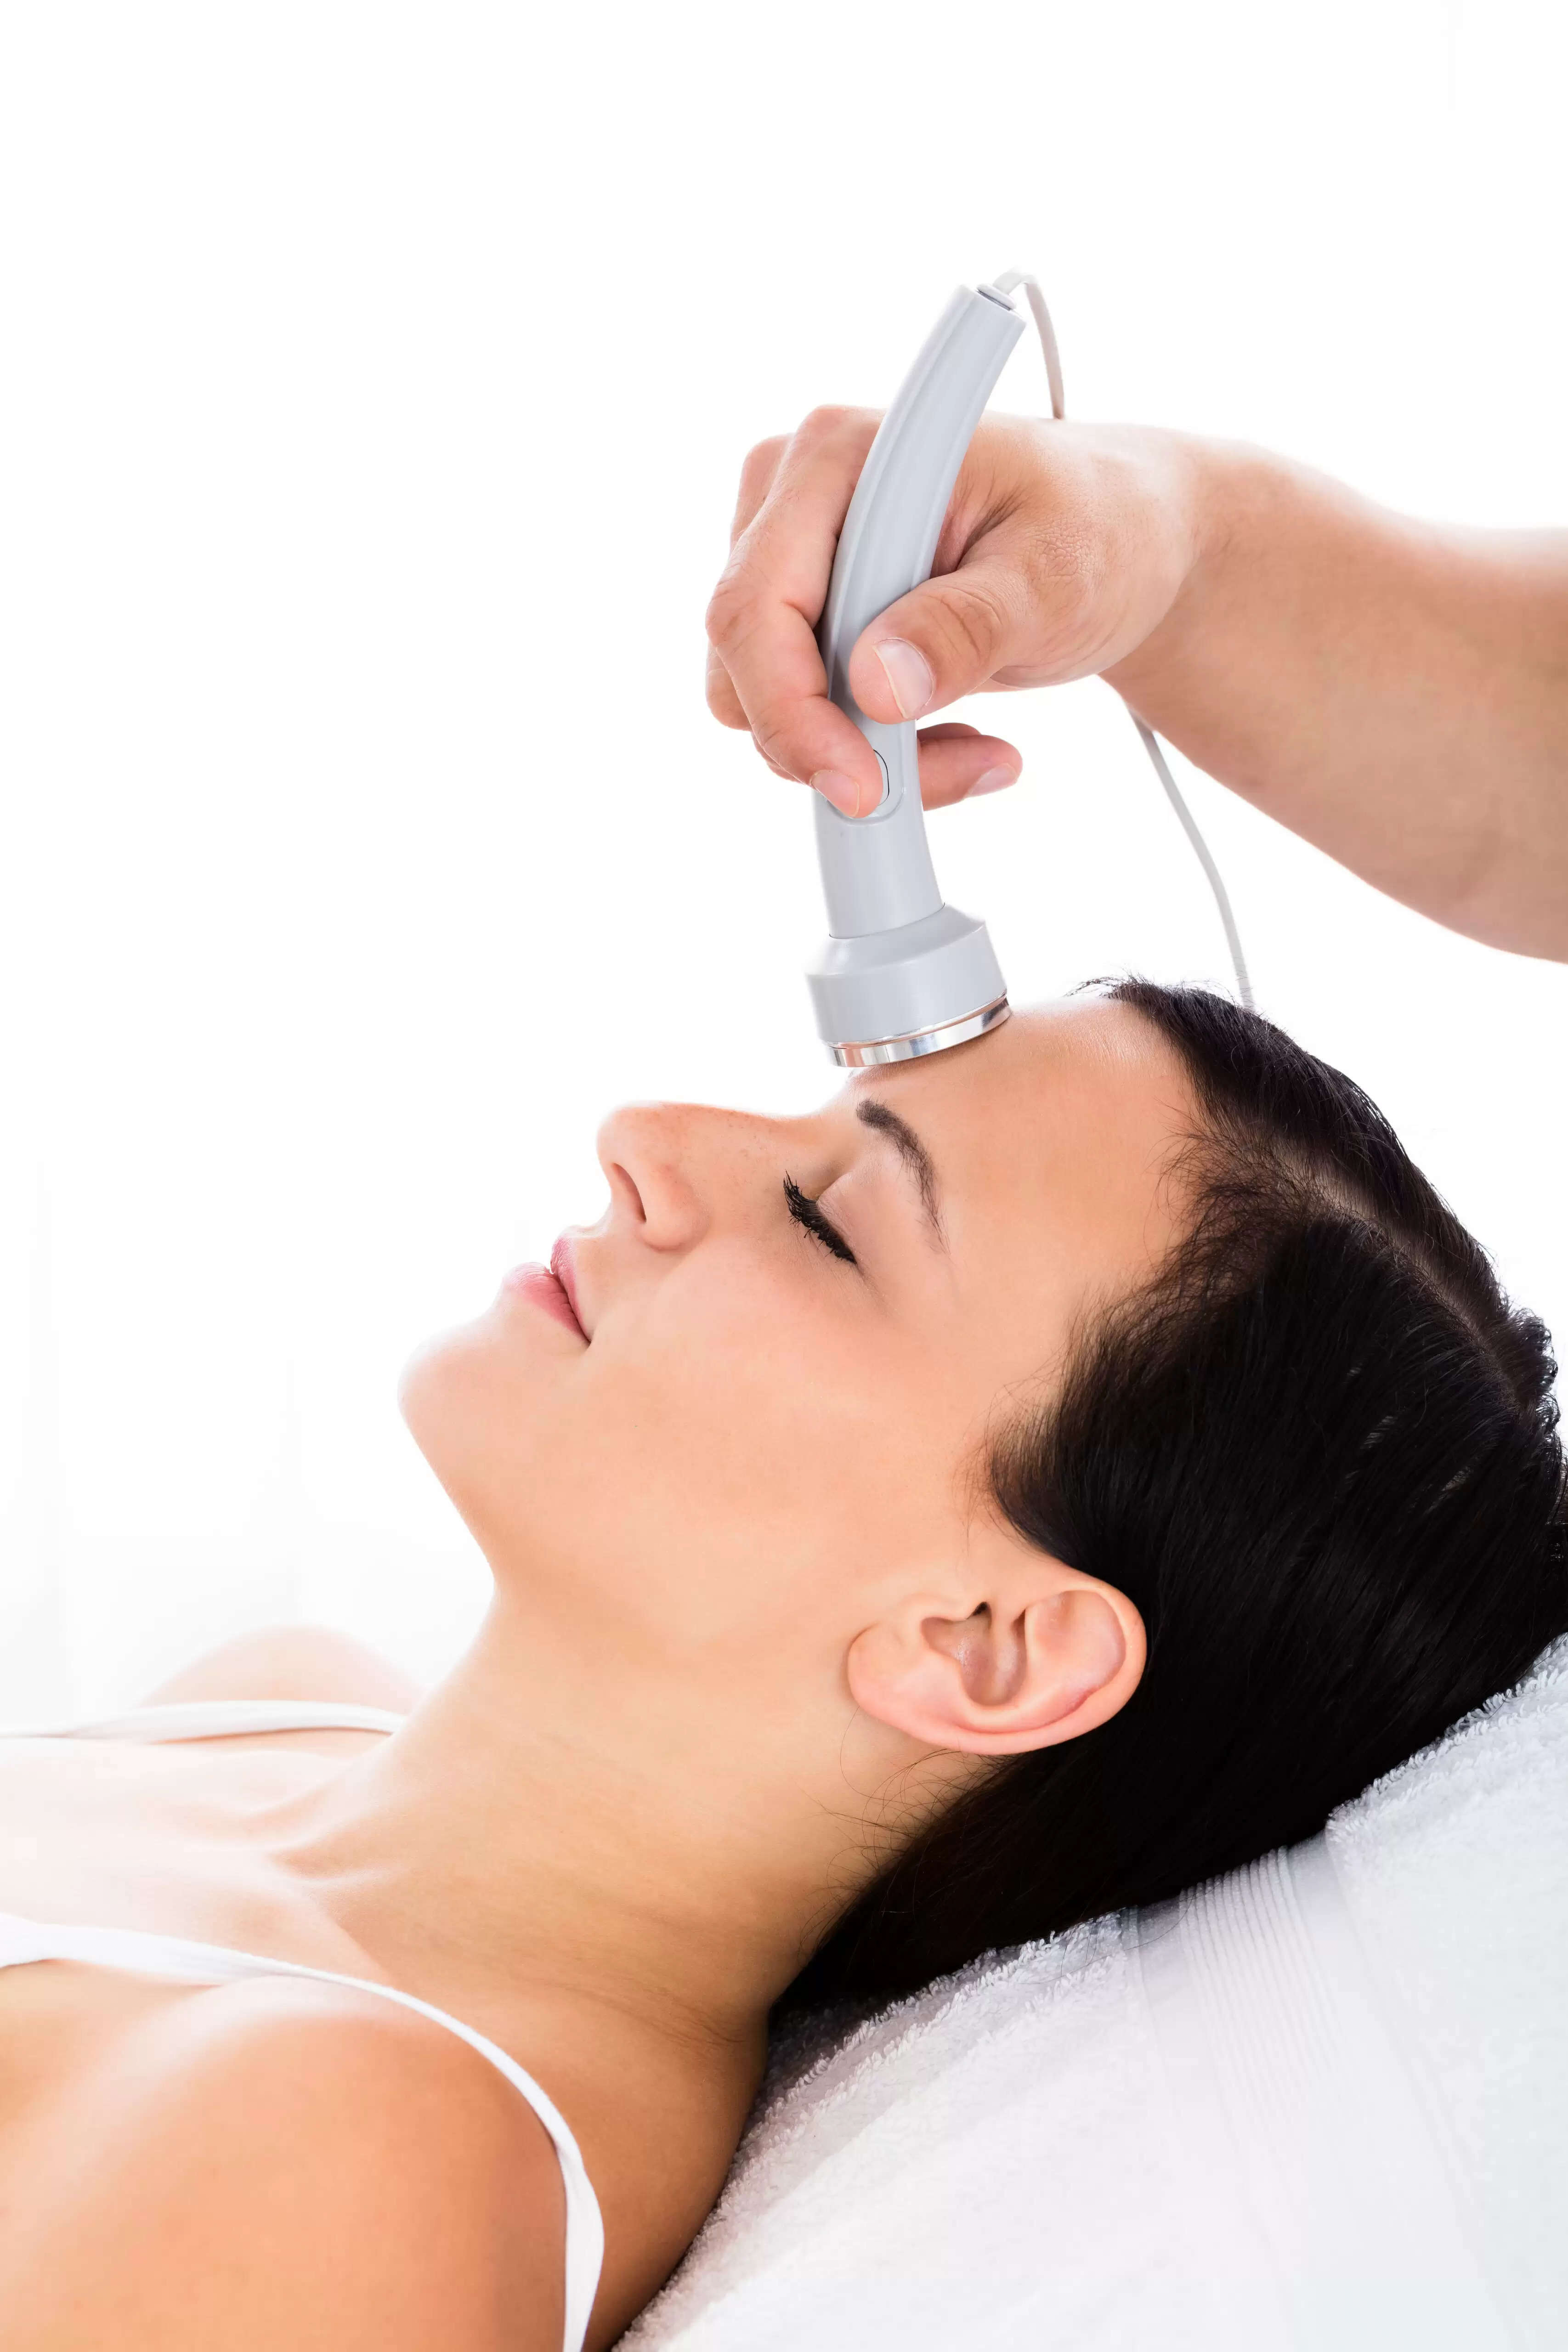 Fractional CO2Laser Treatment | What You Need to Know